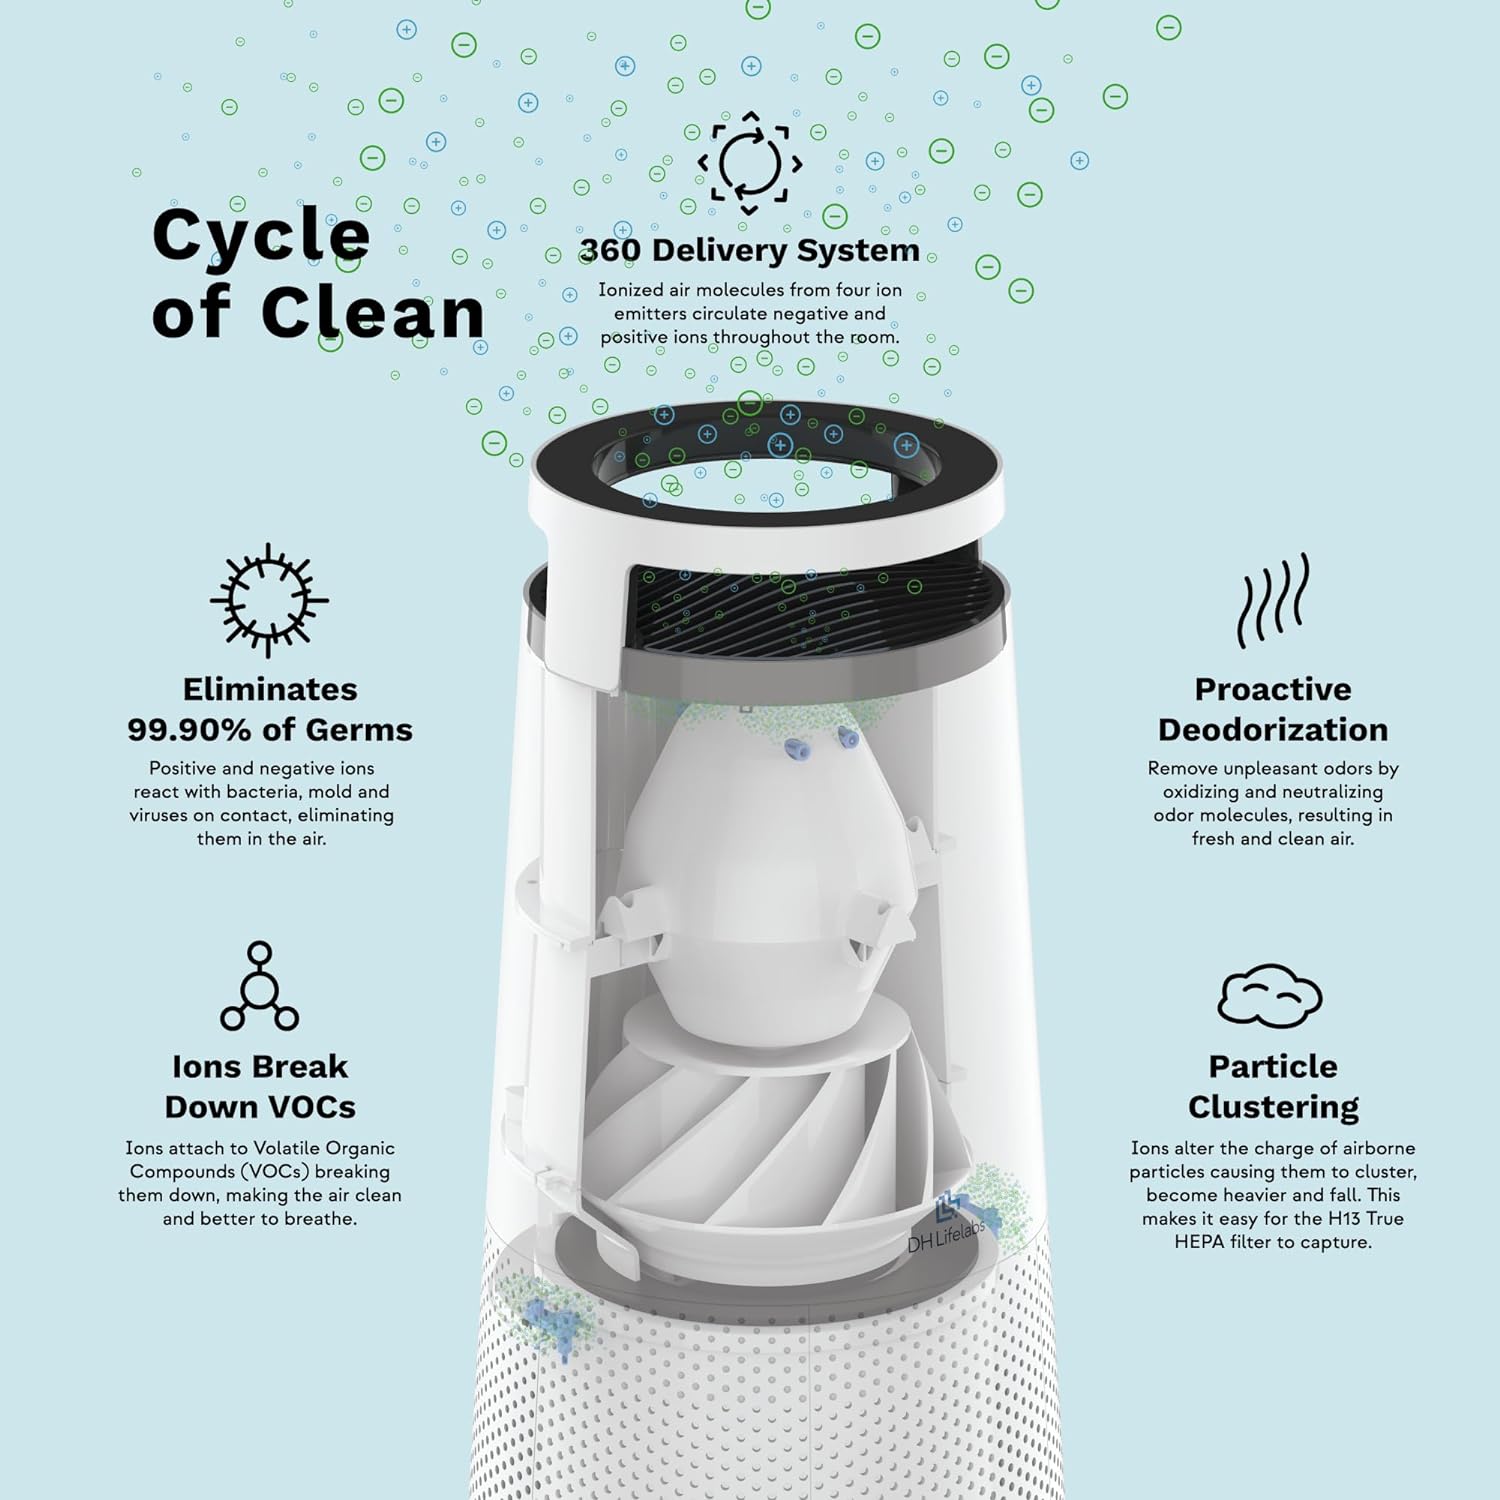 DH Lifelabs HEPA Air Purifier WiFi Enabled Plasma Deodorizes Air Eliminates 99.97% of Bacteria, Viruses, Allergens H13 HEPA Filter for Dust Mold Pollen Coverage for Bedroom Home Sciaire Mini #4WHC